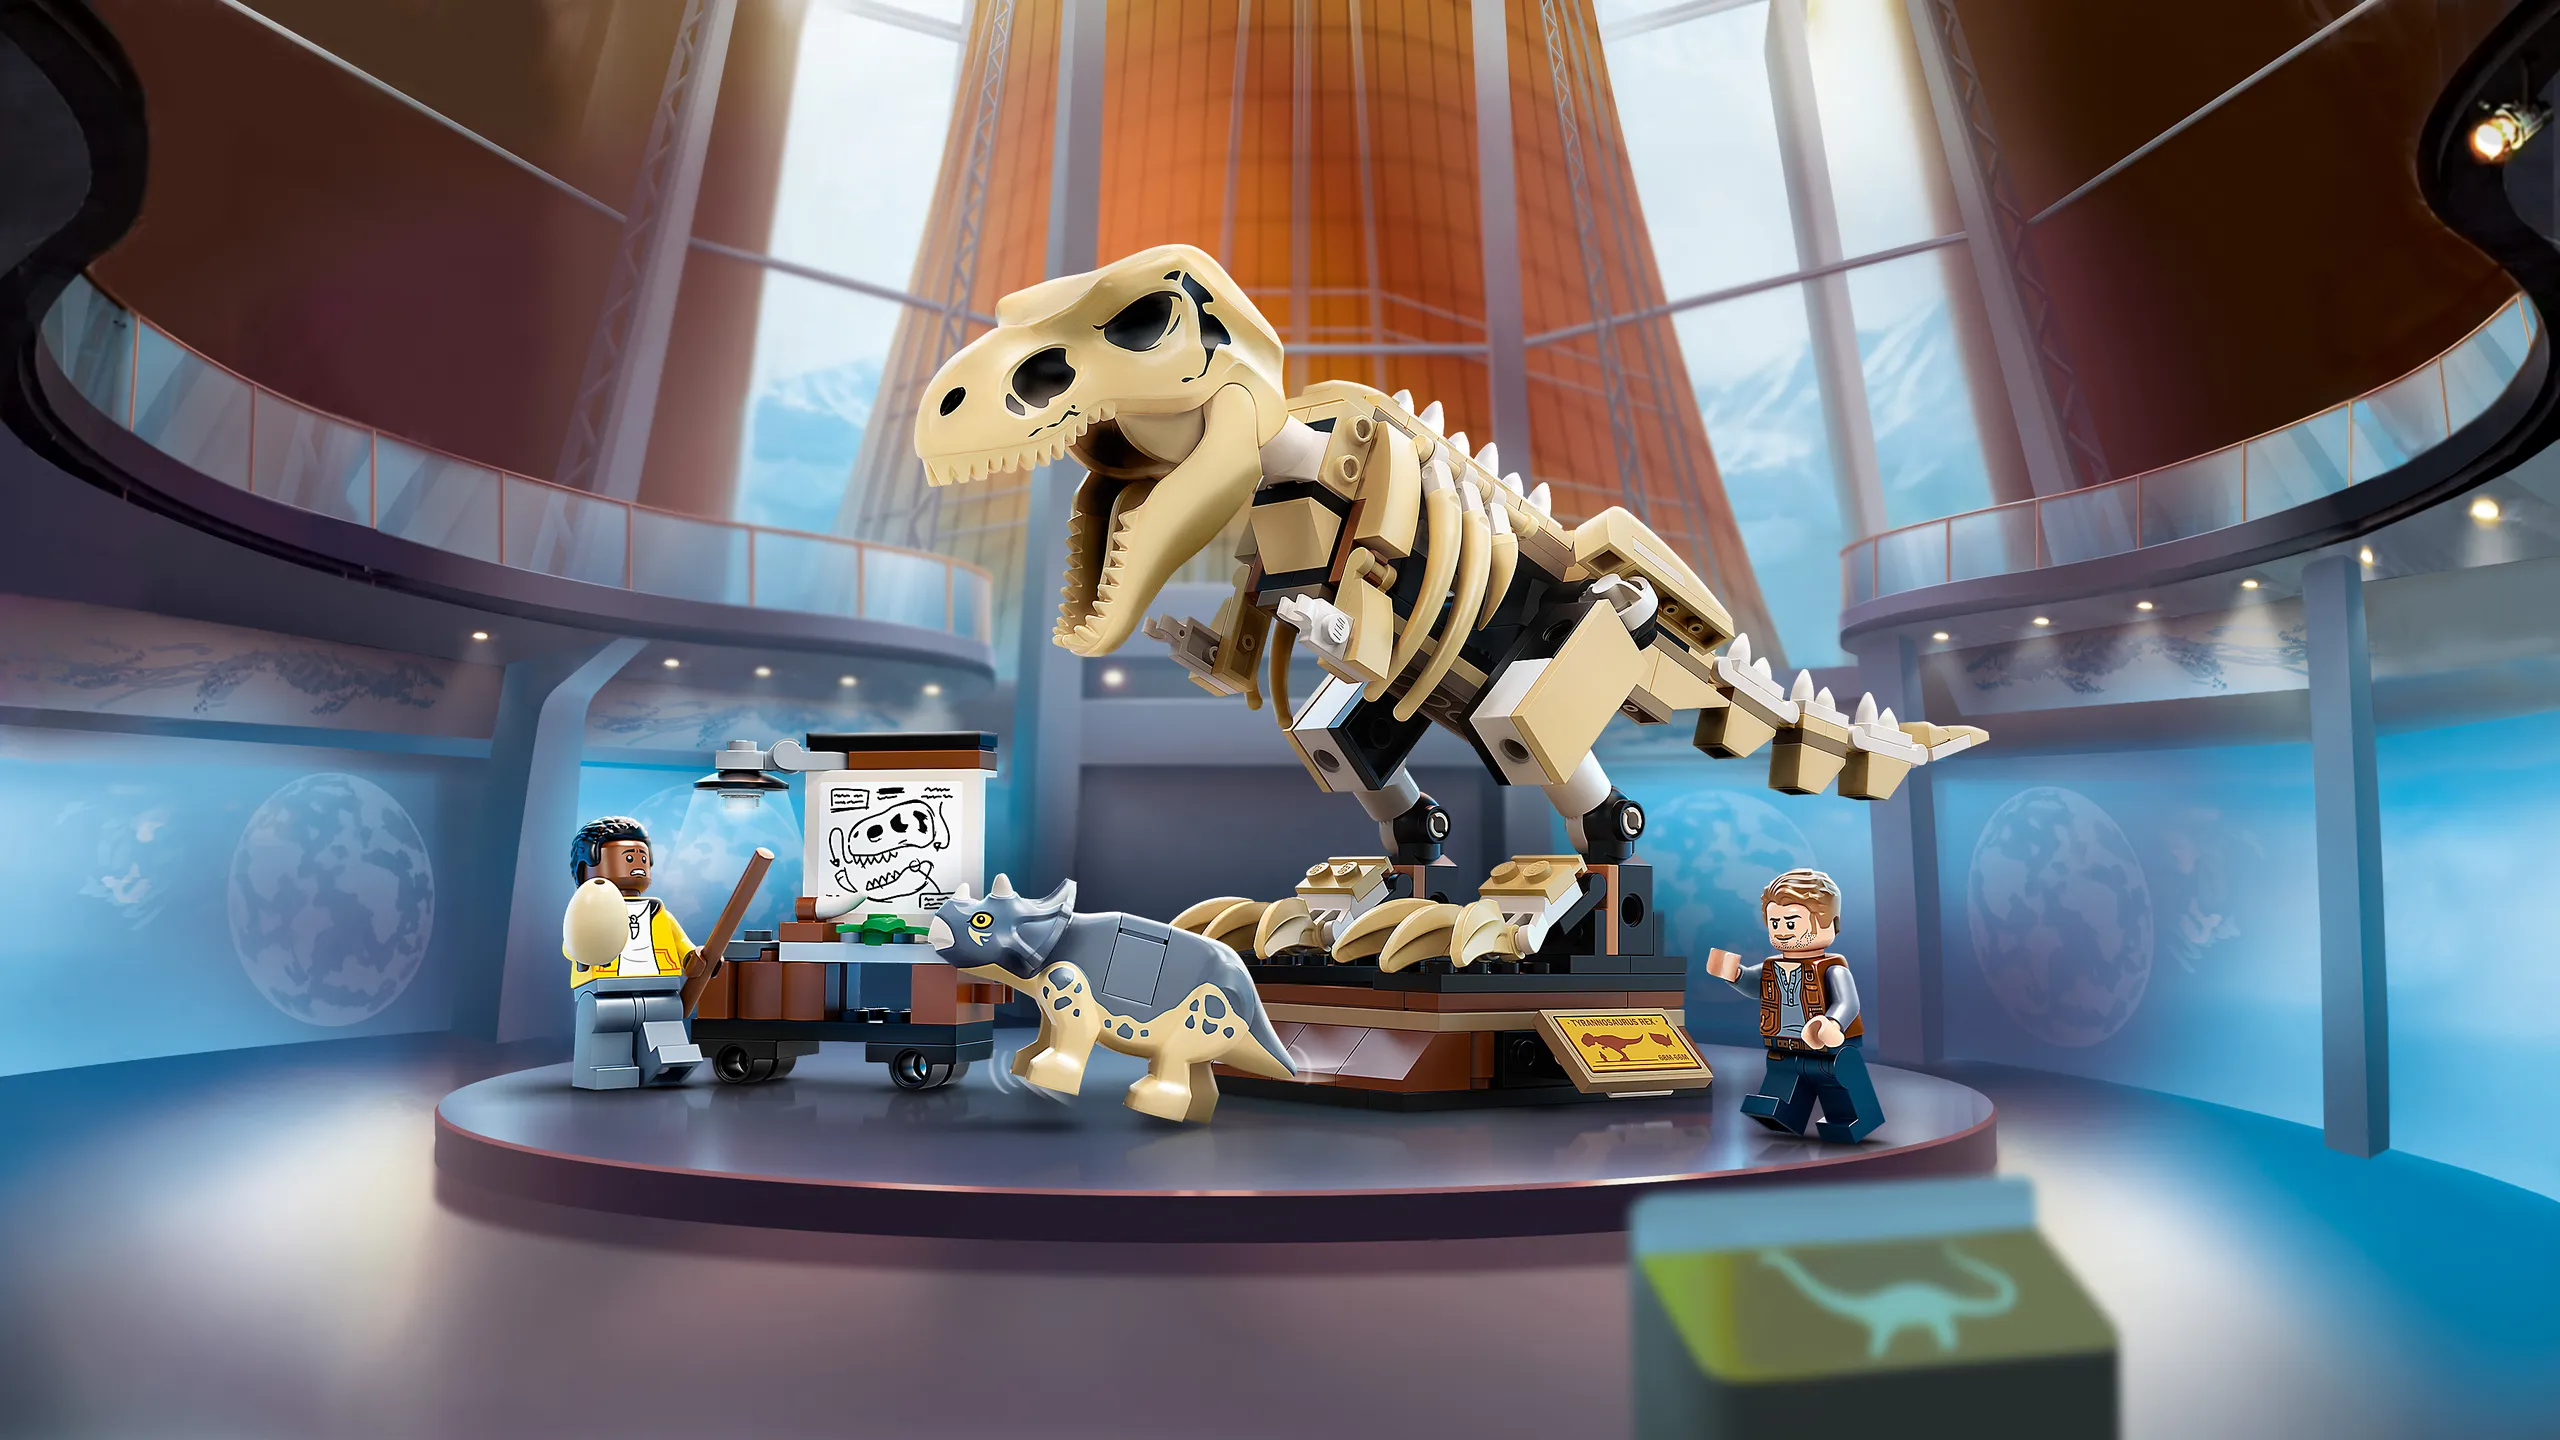 LEGO Jurassic World - Triceratops Chaos Dinosaur Building Toy Inspired by  Jurassic World Movies, New 2019 (75937)